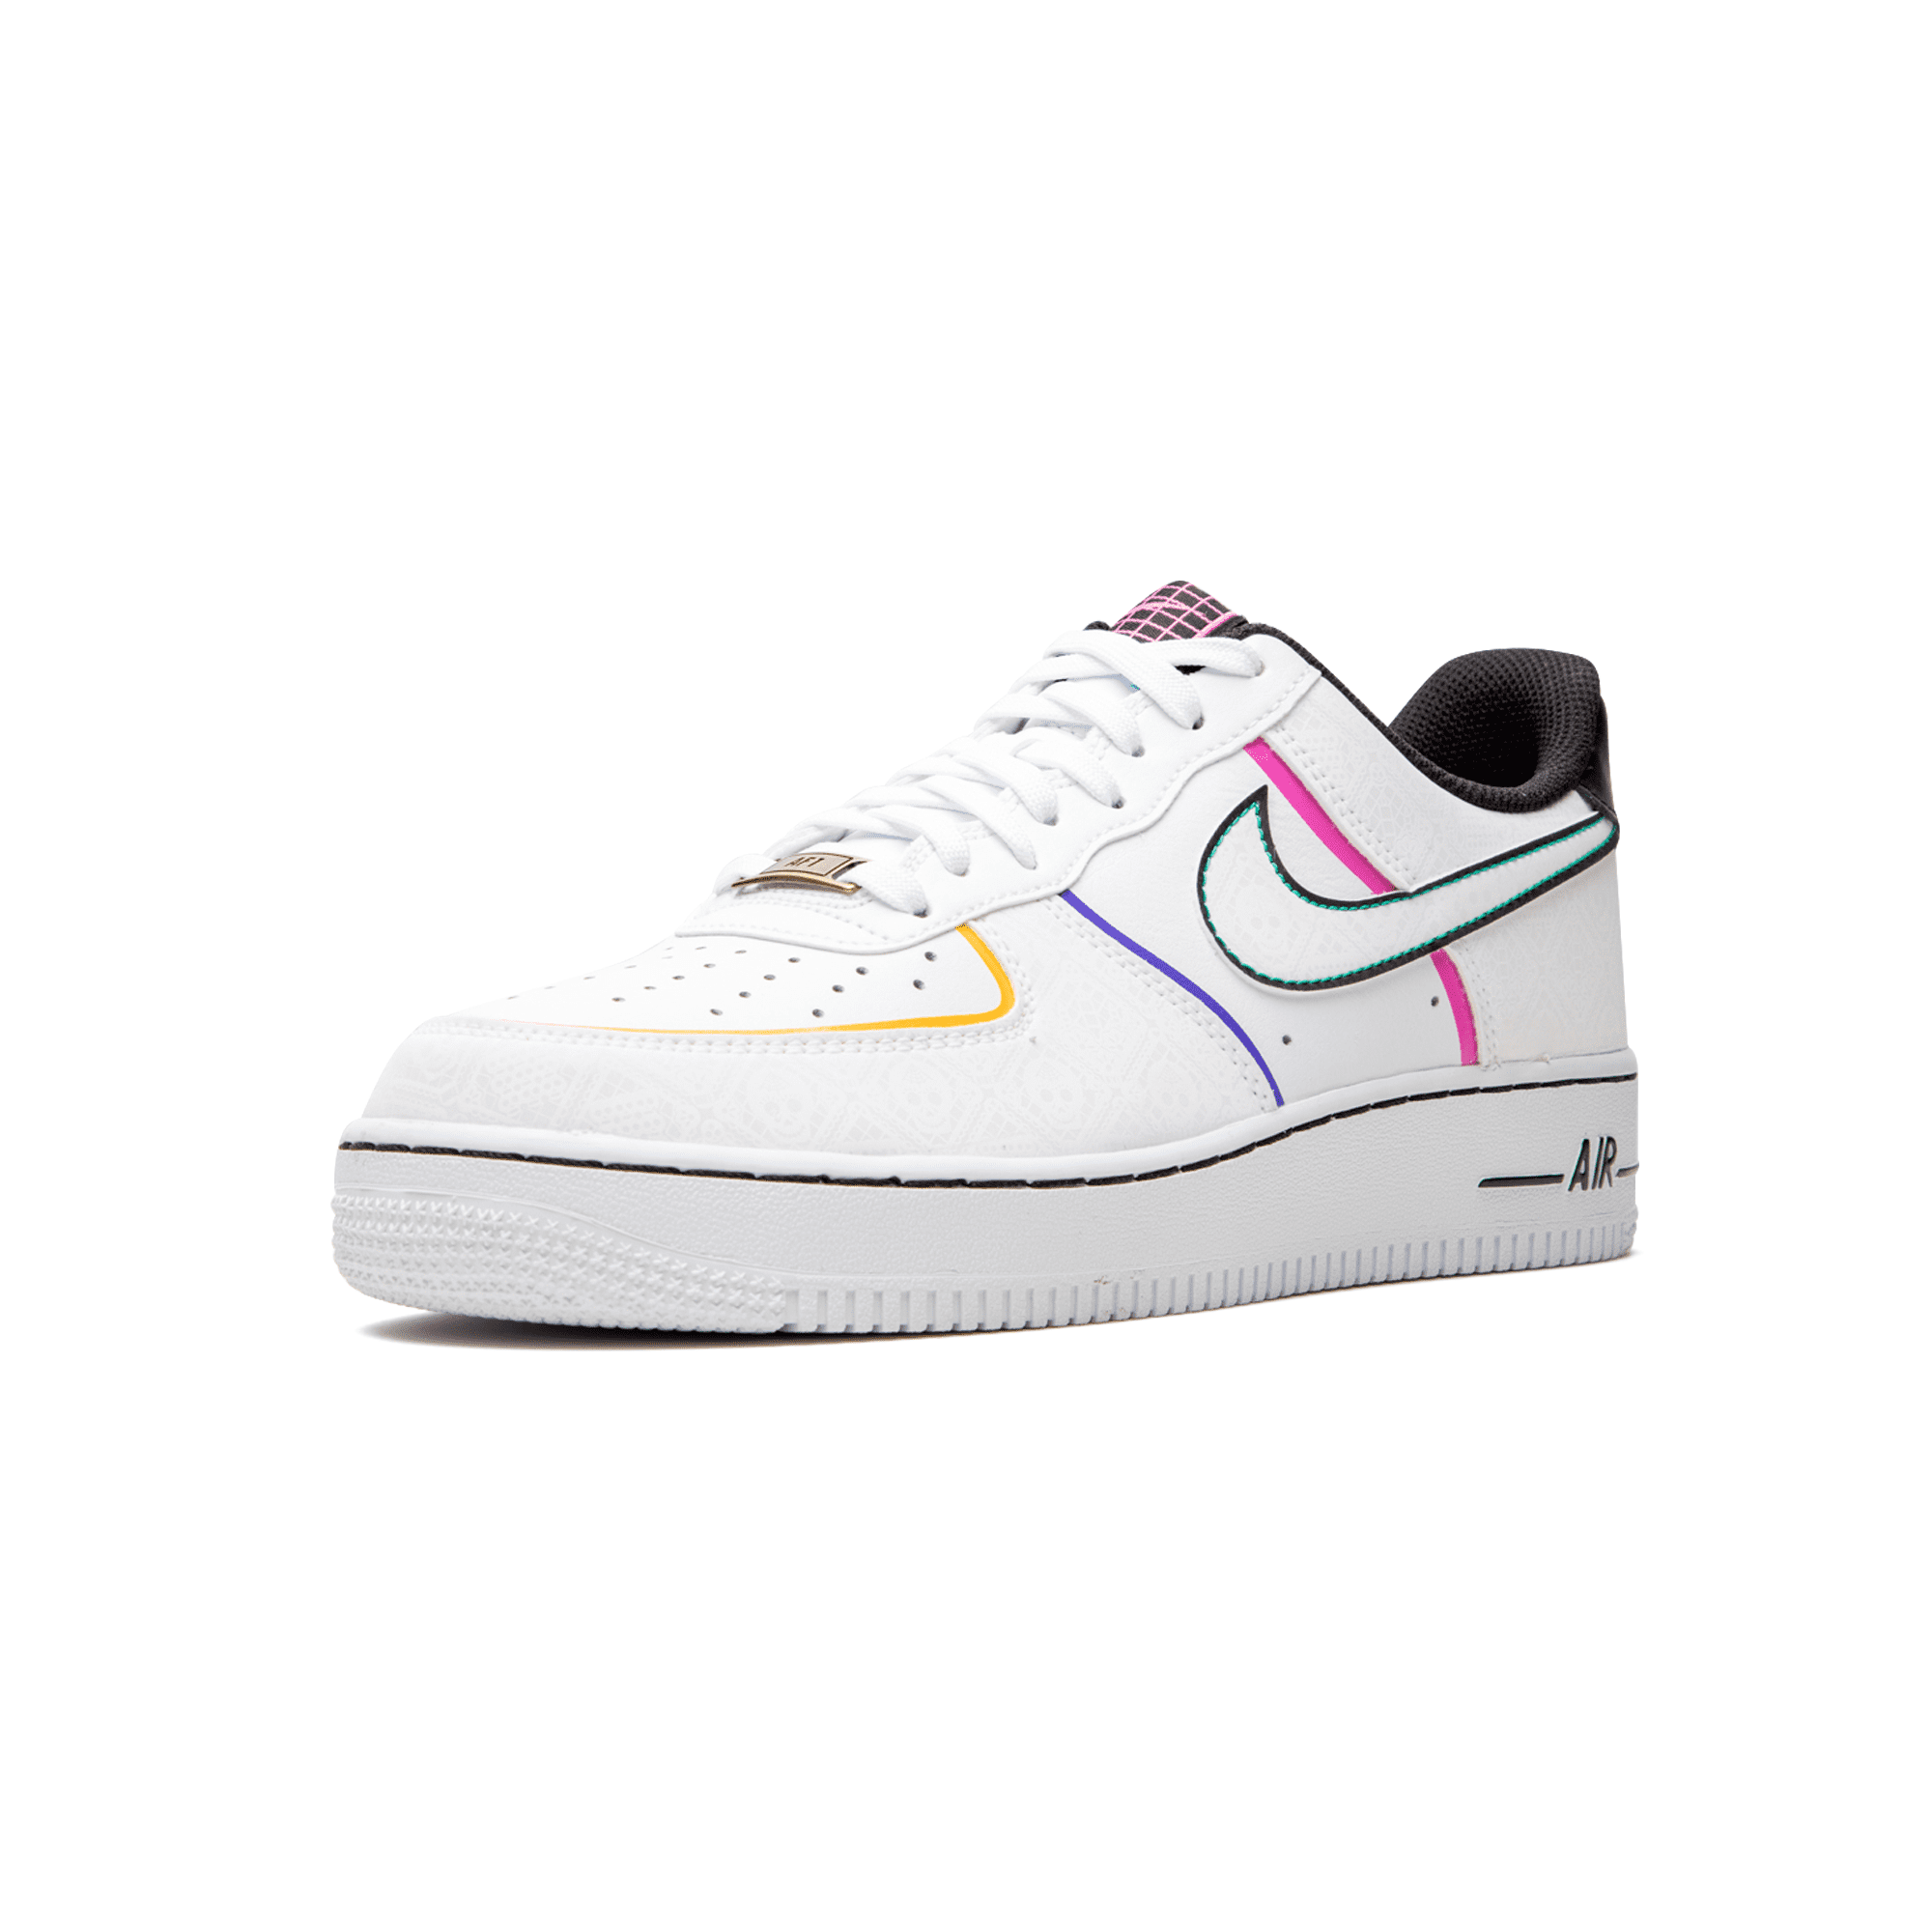 Air Force 1 “Day of the Dead” - Manore Store